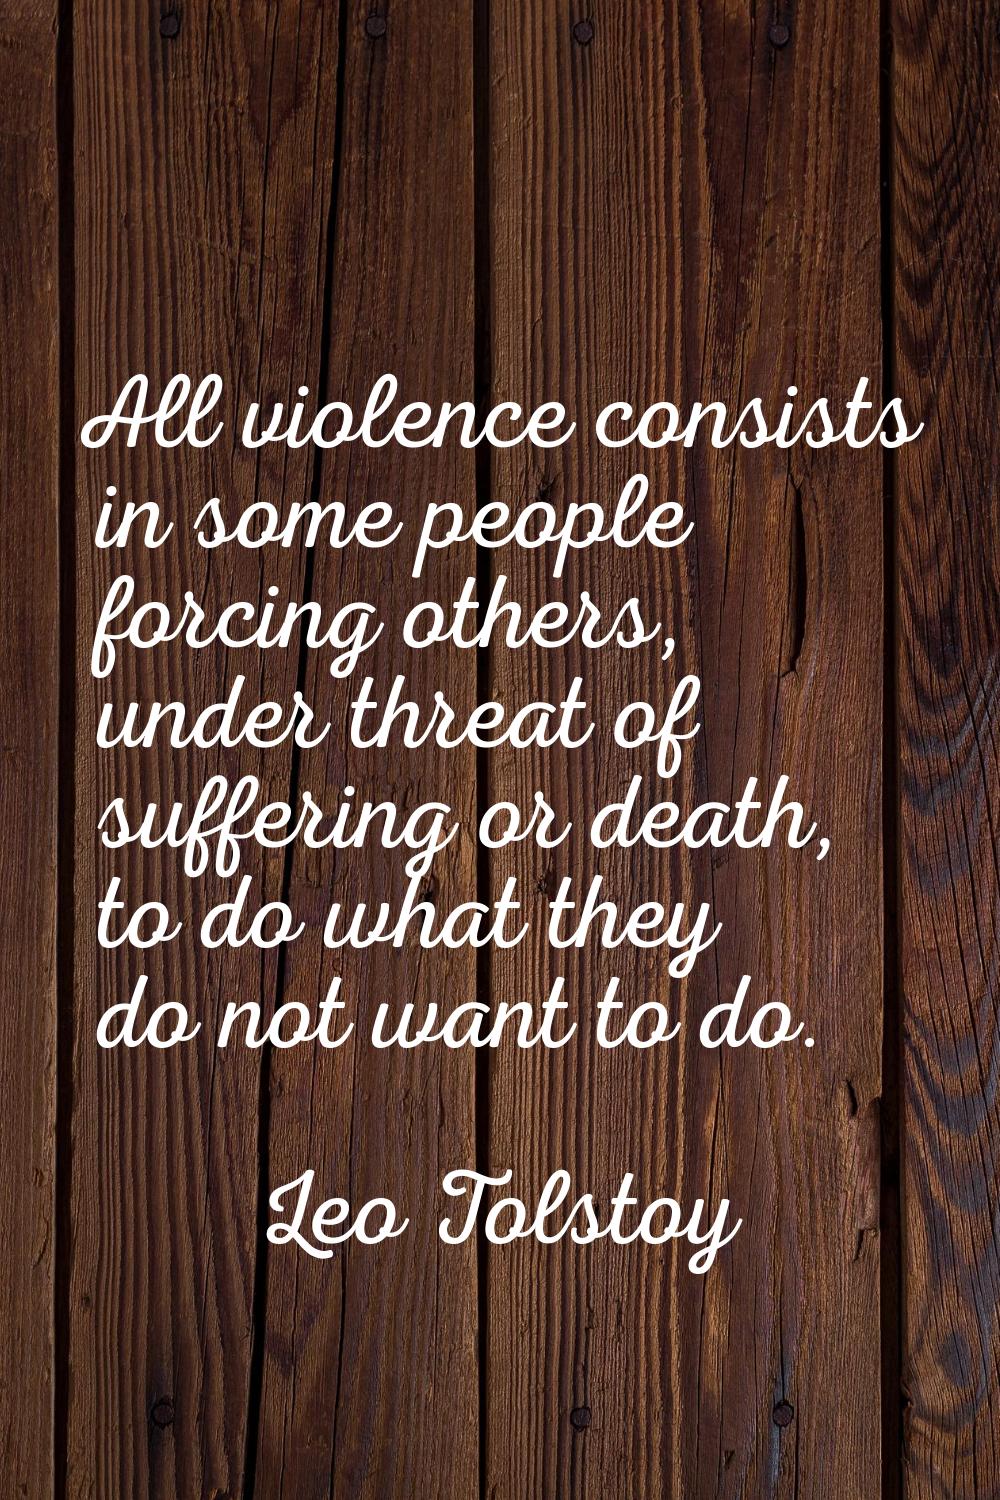 All violence consists in some people forcing others, under threat of suffering or death, to do what